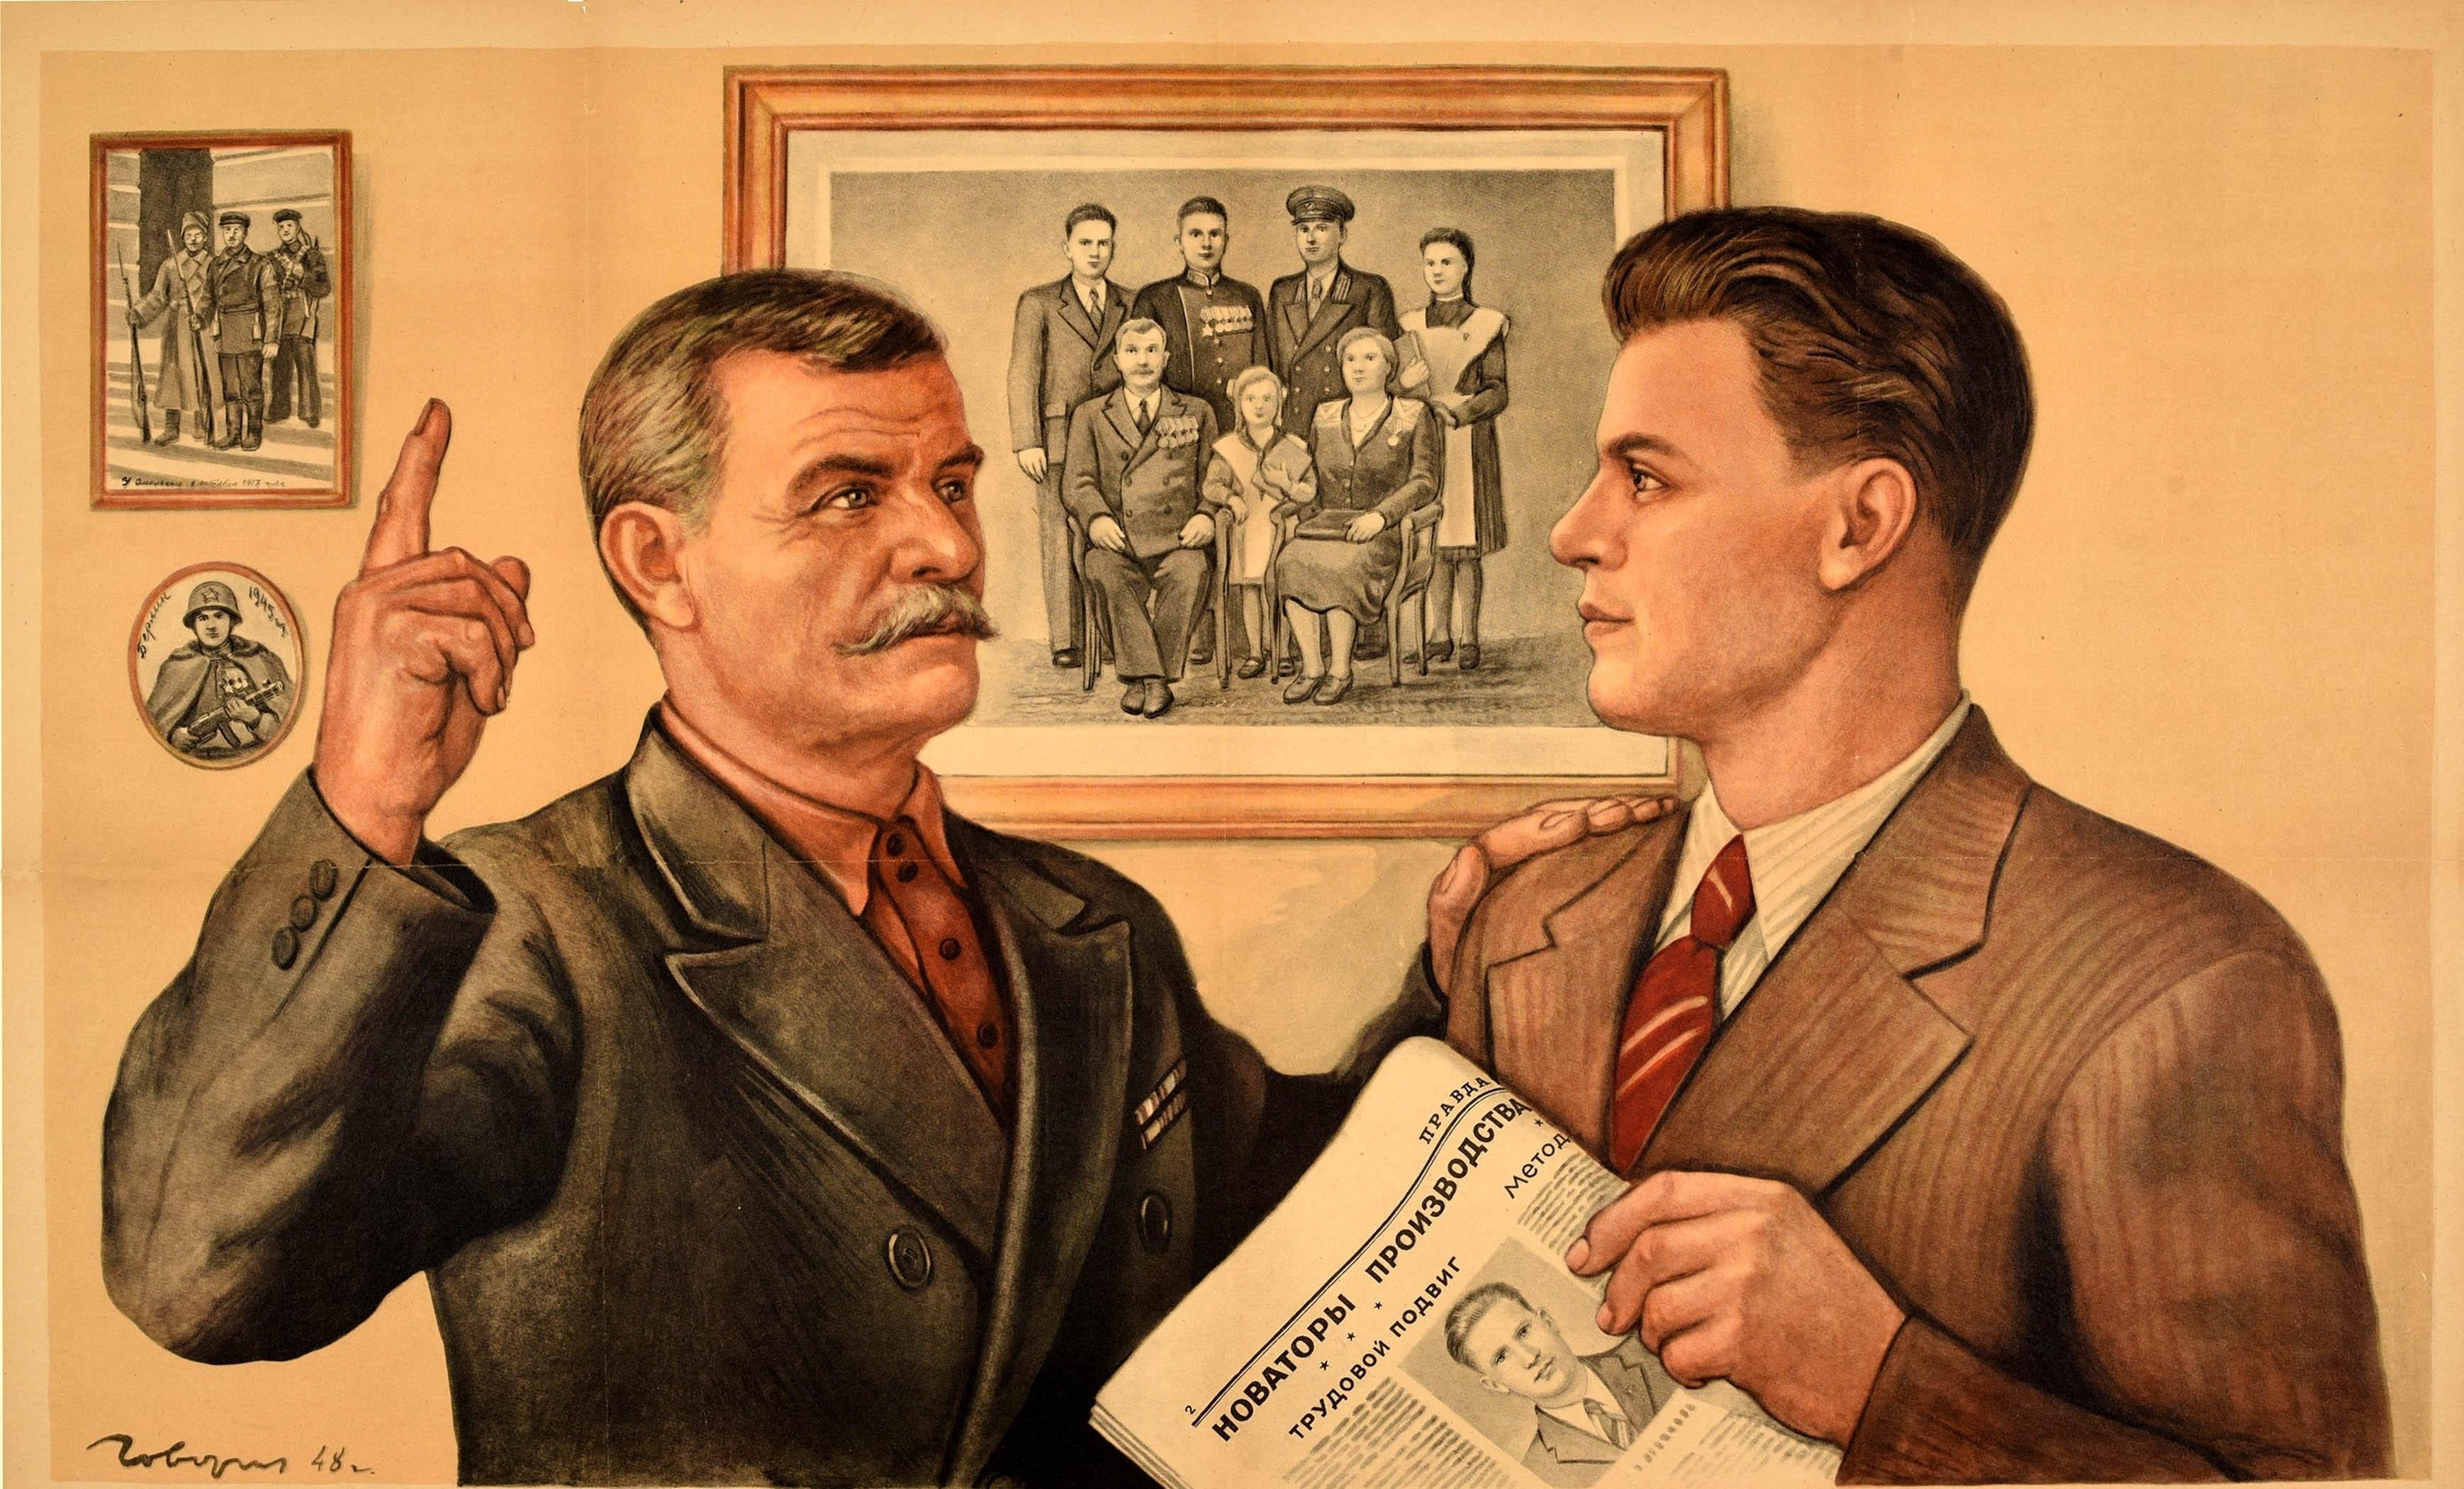 Original vintage Soviet propaganda poster - Treasure the Honour of the Family! - featuring the quote below artwork showing an elderly man pointing to three photographs on a wall of men in military uniform, a soldier and a family together, his other